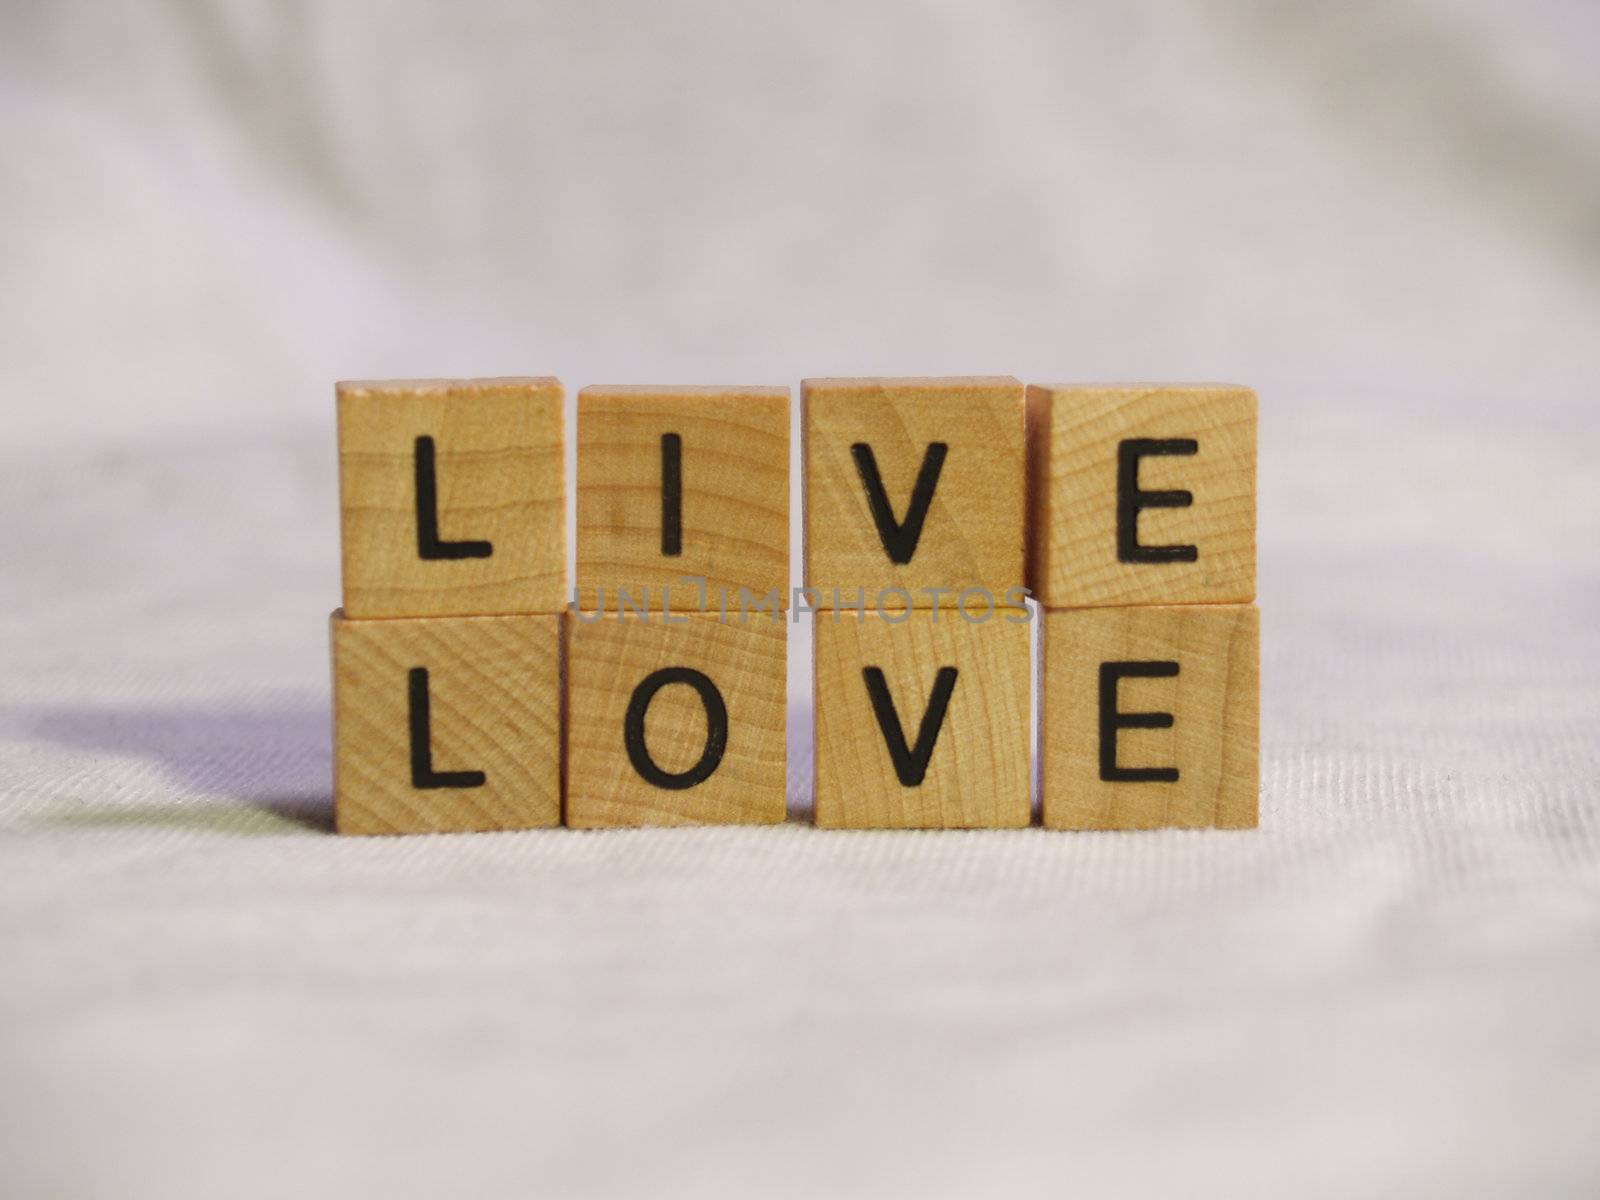 The words LIVE and LOVE spelled out with wooden tiles